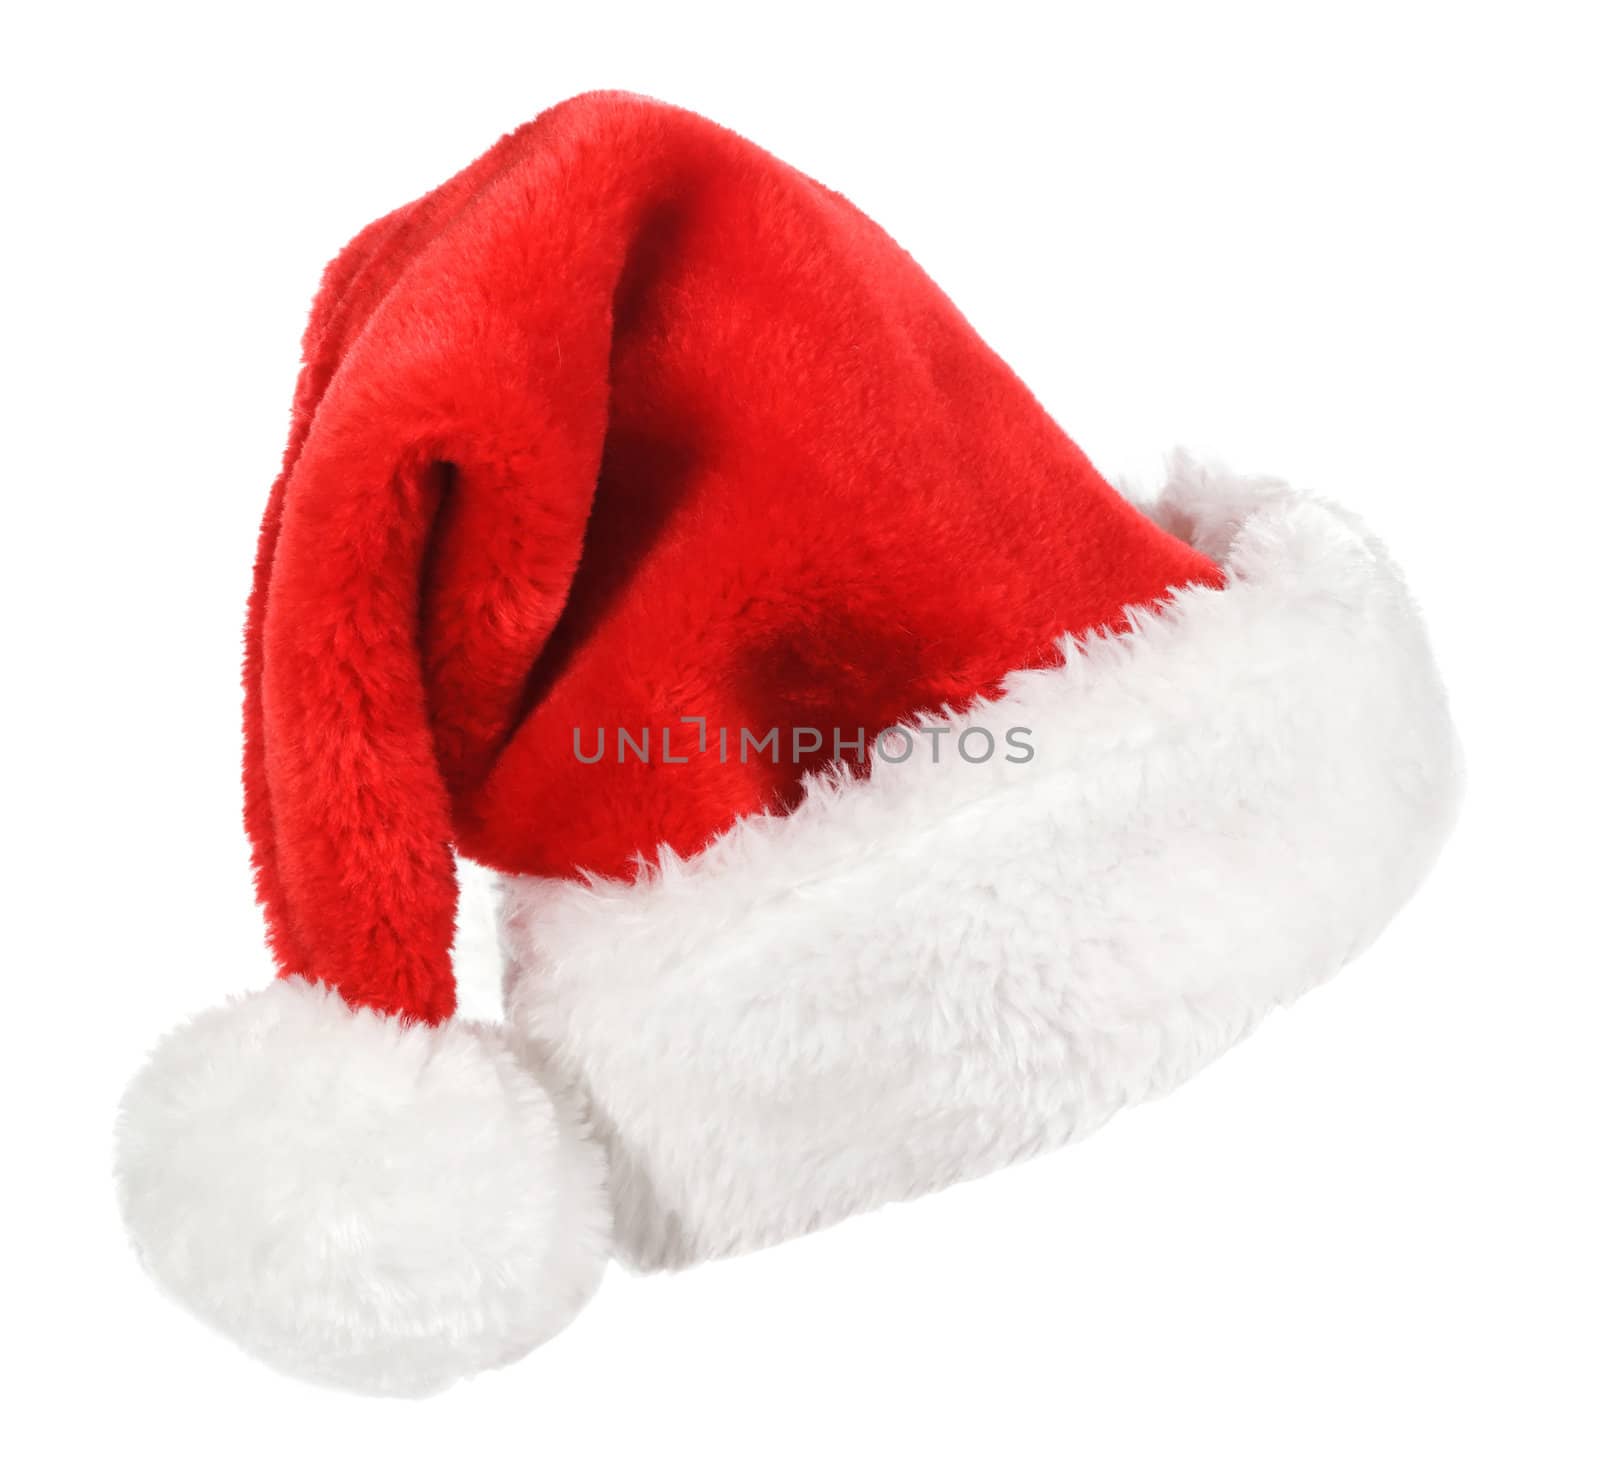 Santa red hat isolated in white background by Bedolaga